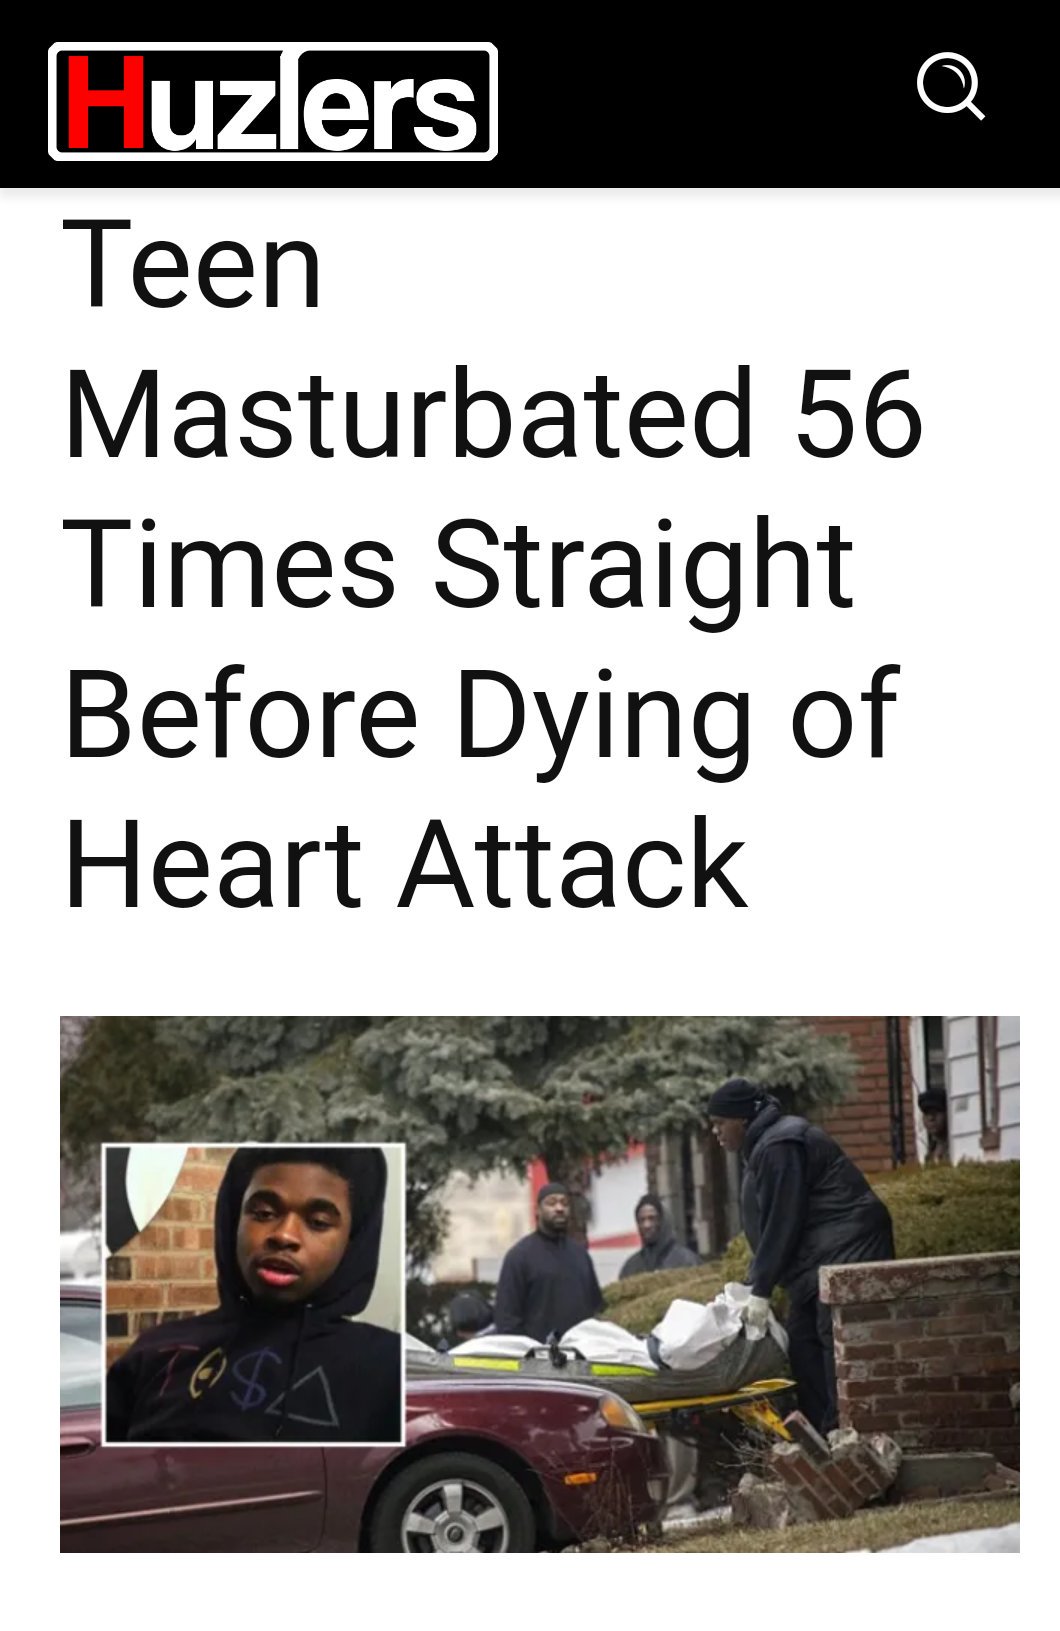 Teen died from masturbating 56 times